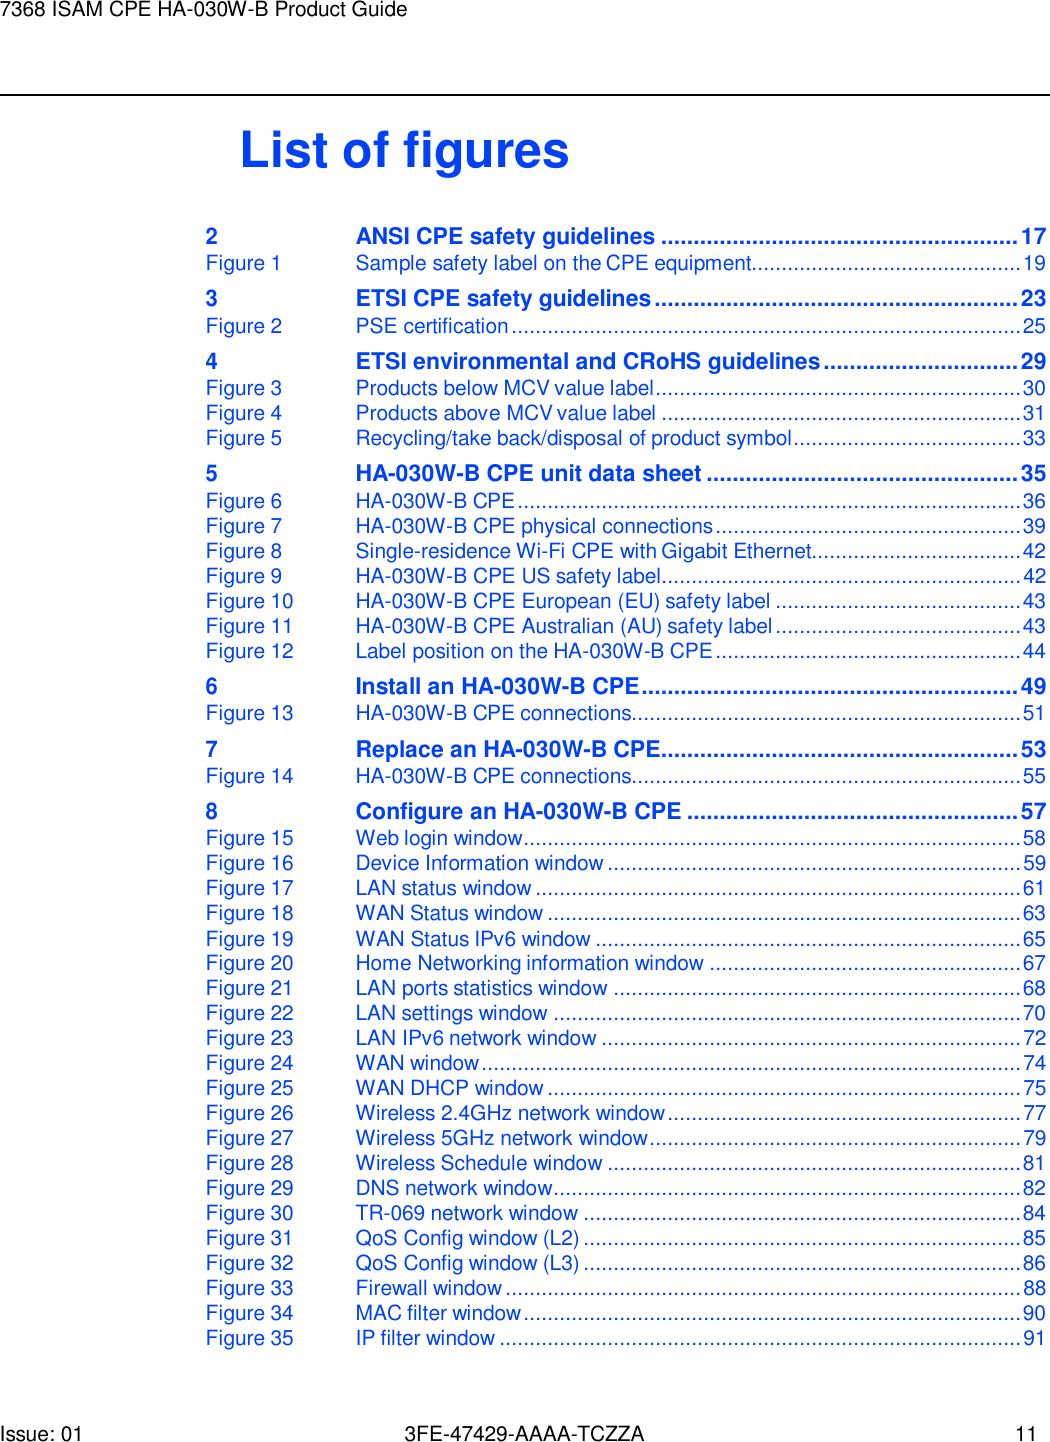 Issue: 01 3FE-47429-AAAA-TCZZA 11 7368 ISAM CPE HA-030W-B Product Guide       List of figures 2 ANSI CPE safety guidelines ....................................................... 17 Figure 1  Sample safety label on the CPE equipment............................................. 19 3 ETSI CPE safety guidelines ........................................................ 23 Figure 2  PSE certification ..................................................................................... 25 4 ETSI environmental and CRoHS guidelines .............................. 29 Figure 3  Products below MCV value label ............................................................. 30 Figure 4  Products above MCV value label ............................................................ 31 Figure 5  Recycling/take back/disposal of product symbol ...................................... 33 5 HA-030W-B CPE unit data sheet ................................................ 35 Figure 6  HA-030W-B CPE .................................................................................... 36 Figure 7  HA-030W-B CPE physical connections ................................................... 39 Figure 8  Single-residence Wi-Fi CPE with Gigabit Ethernet................................... 42 Figure 9  HA-030W-B CPE US safety label ............................................................ 42 Figure 10 HA-030W-B CPE European (EU) safety label ......................................... 43 Figure 11 HA-030W-B CPE Australian (AU) safety label ......................................... 43 Figure 12  Label position on the HA-030W-B CPE ................................................... 44 6 Install an HA-030W-B CPE .......................................................... 49 Figure 13 HA-030W-B CPE connections................................................................. 51 7 Replace an HA-030W-B CPE....................................................... 53 Figure 14 HA-030W-B CPE connections................................................................. 55 8 Configure an HA-030W-B CPE ................................................... 57 Figure 15  Web login window ................................................................................... 58 Figure 16  Device Information window ..................................................................... 59 Figure 17  LAN status window ................................................................................. 61 Figure 18  WAN Status window ............................................................................... 63 Figure 19  WAN Status IPv6 window ....................................................................... 65 Figure 20  Home Networking information window .................................................... 67 Figure 21  LAN ports statistics window .................................................................... 68 Figure 22  LAN settings window .............................................................................. 70 Figure 23  LAN IPv6 network window ...................................................................... 72 Figure 24  WAN window .......................................................................................... 74 Figure 25  WAN DHCP window ............................................................................... 75 Figure 26  Wireless 2.4GHz network window ........................................................... 77 Figure 27  Wireless 5GHz network window .............................................................. 79 Figure 28  Wireless Schedule window ..................................................................... 81 Figure 29 DNS network window .............................................................................. 82 Figure 30 TR-069 network window ......................................................................... 84 Figure 31  QoS Config window (L2) ......................................................................... 85 Figure 32  QoS Config window (L3) ......................................................................... 86 Figure 33  Firewall window ...................................................................................... 88 Figure 34 MAC filter window ................................................................................... 90 Figure 35 IP filter window ....................................................................................... 91 